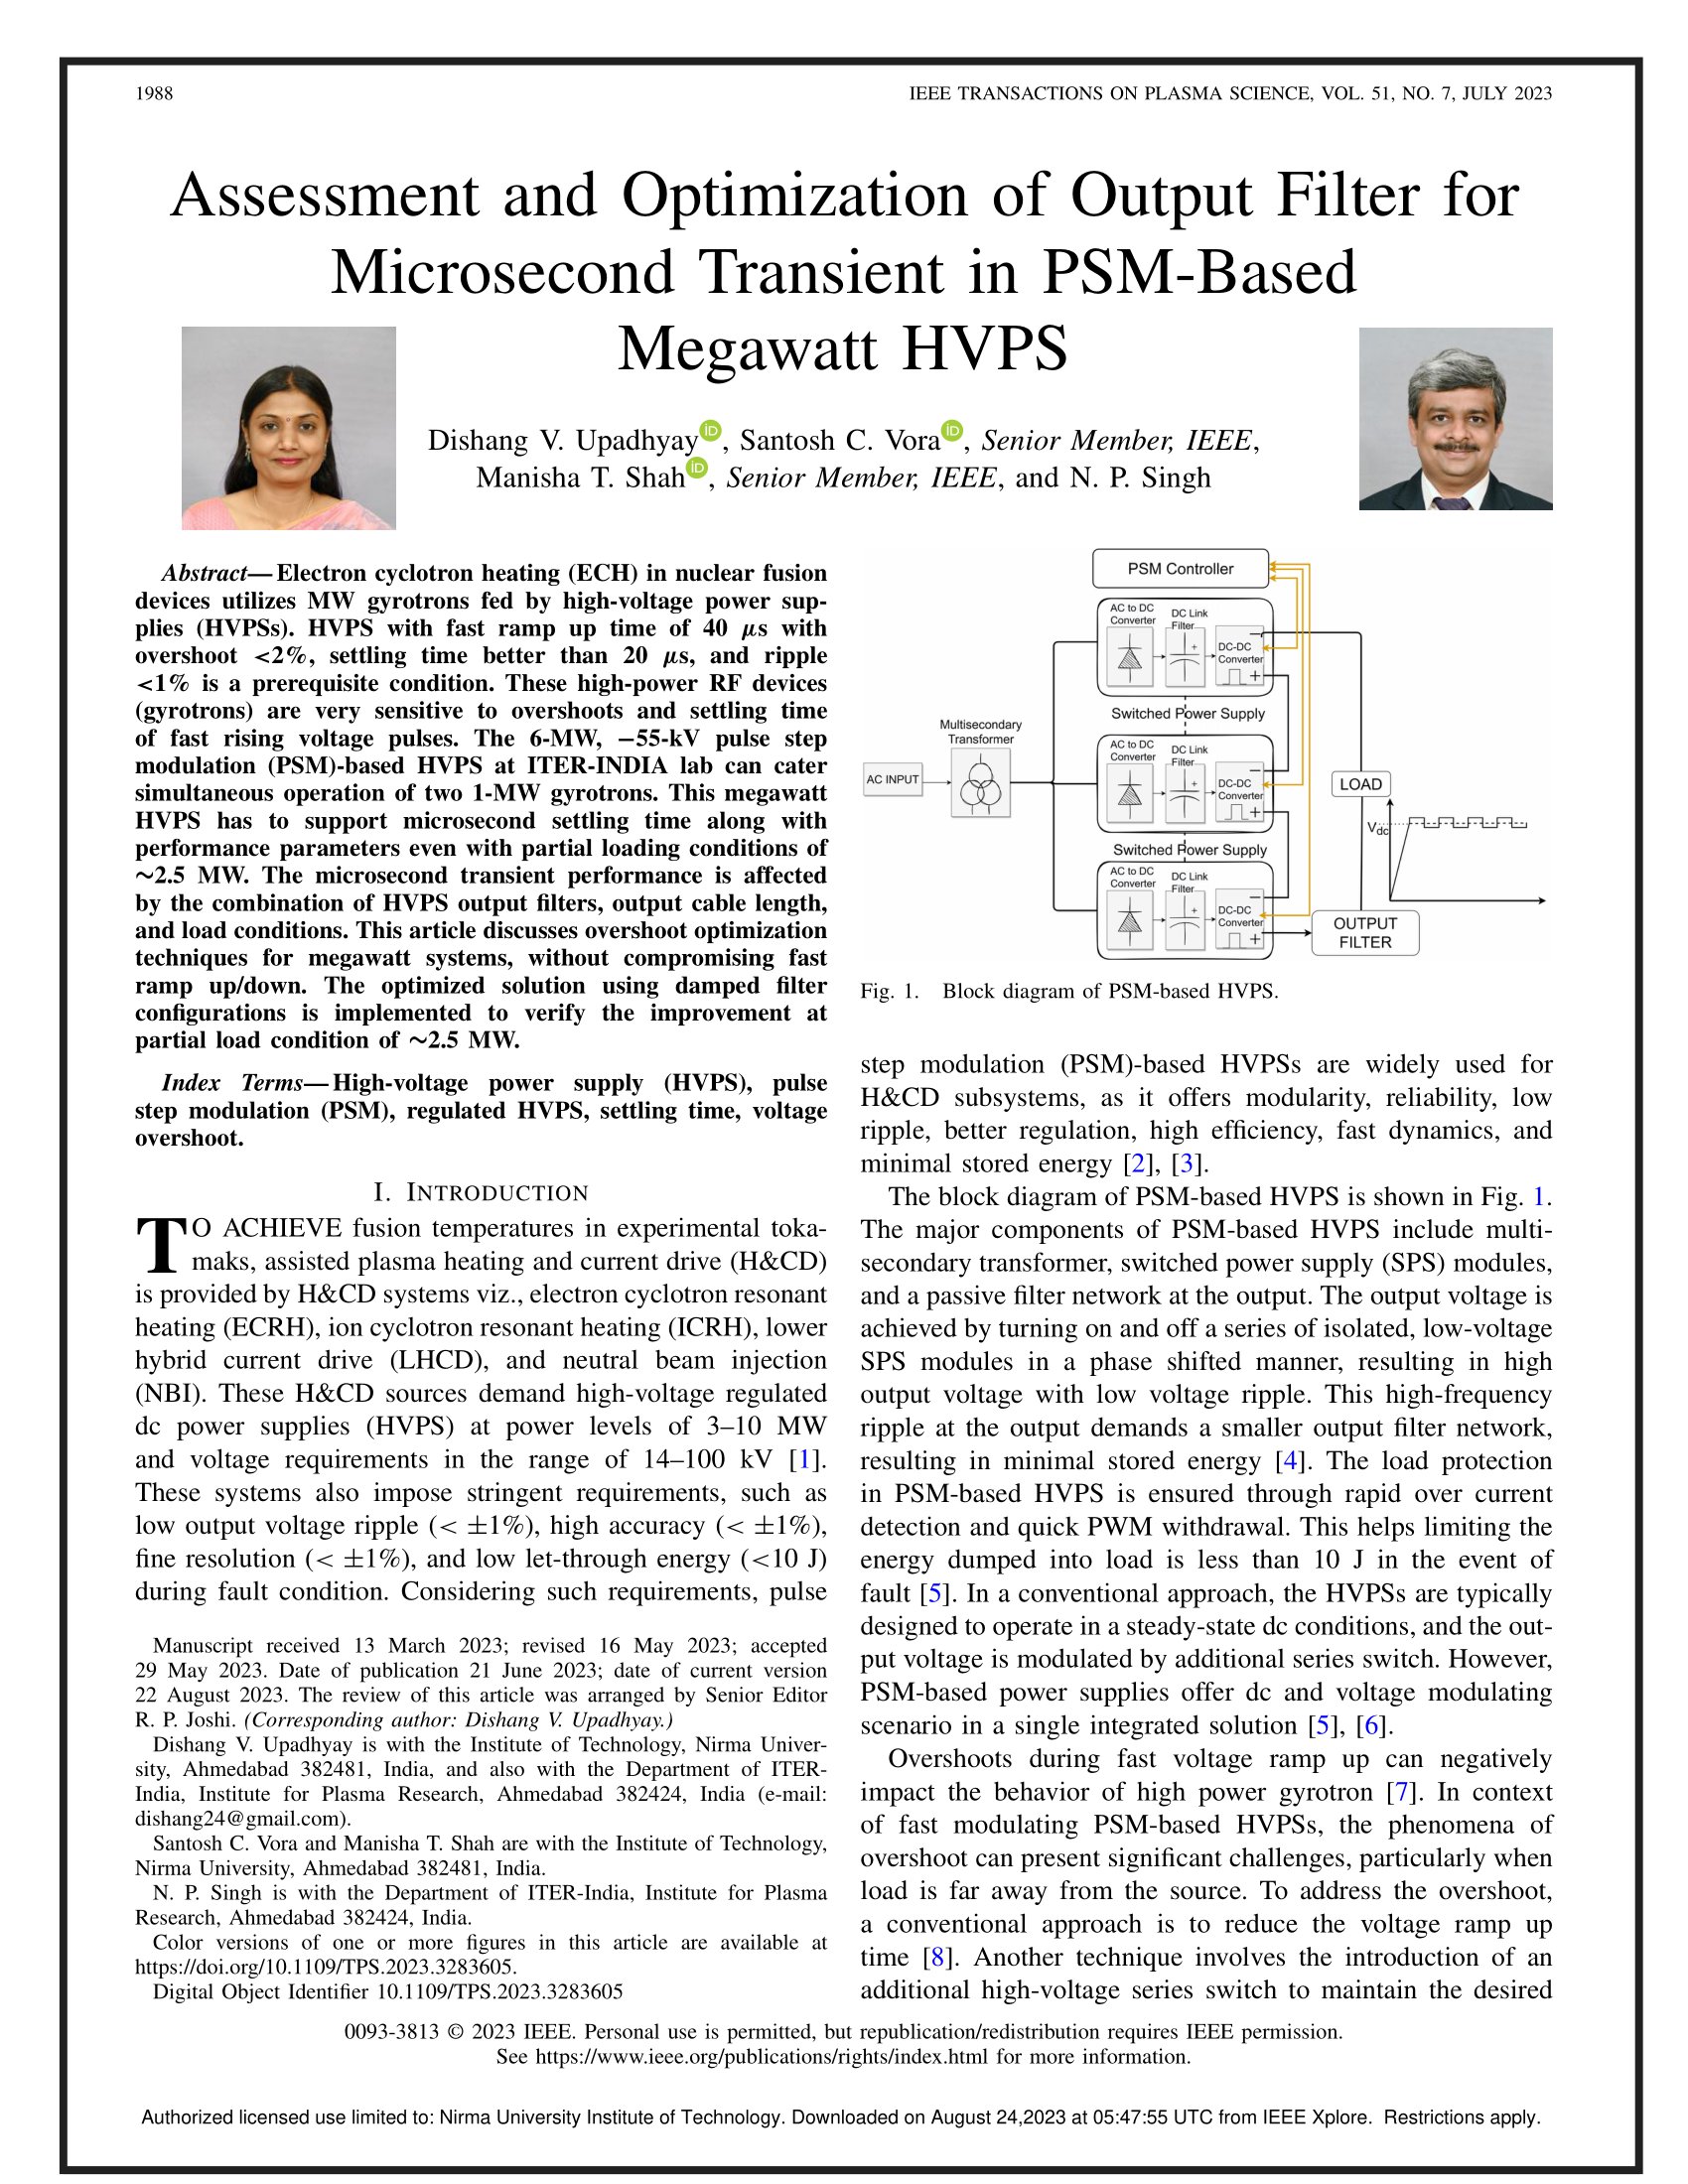 Assessment and Optimization of Output Filter for Microsecond Transient in PSM-Based Megawatt HVPS